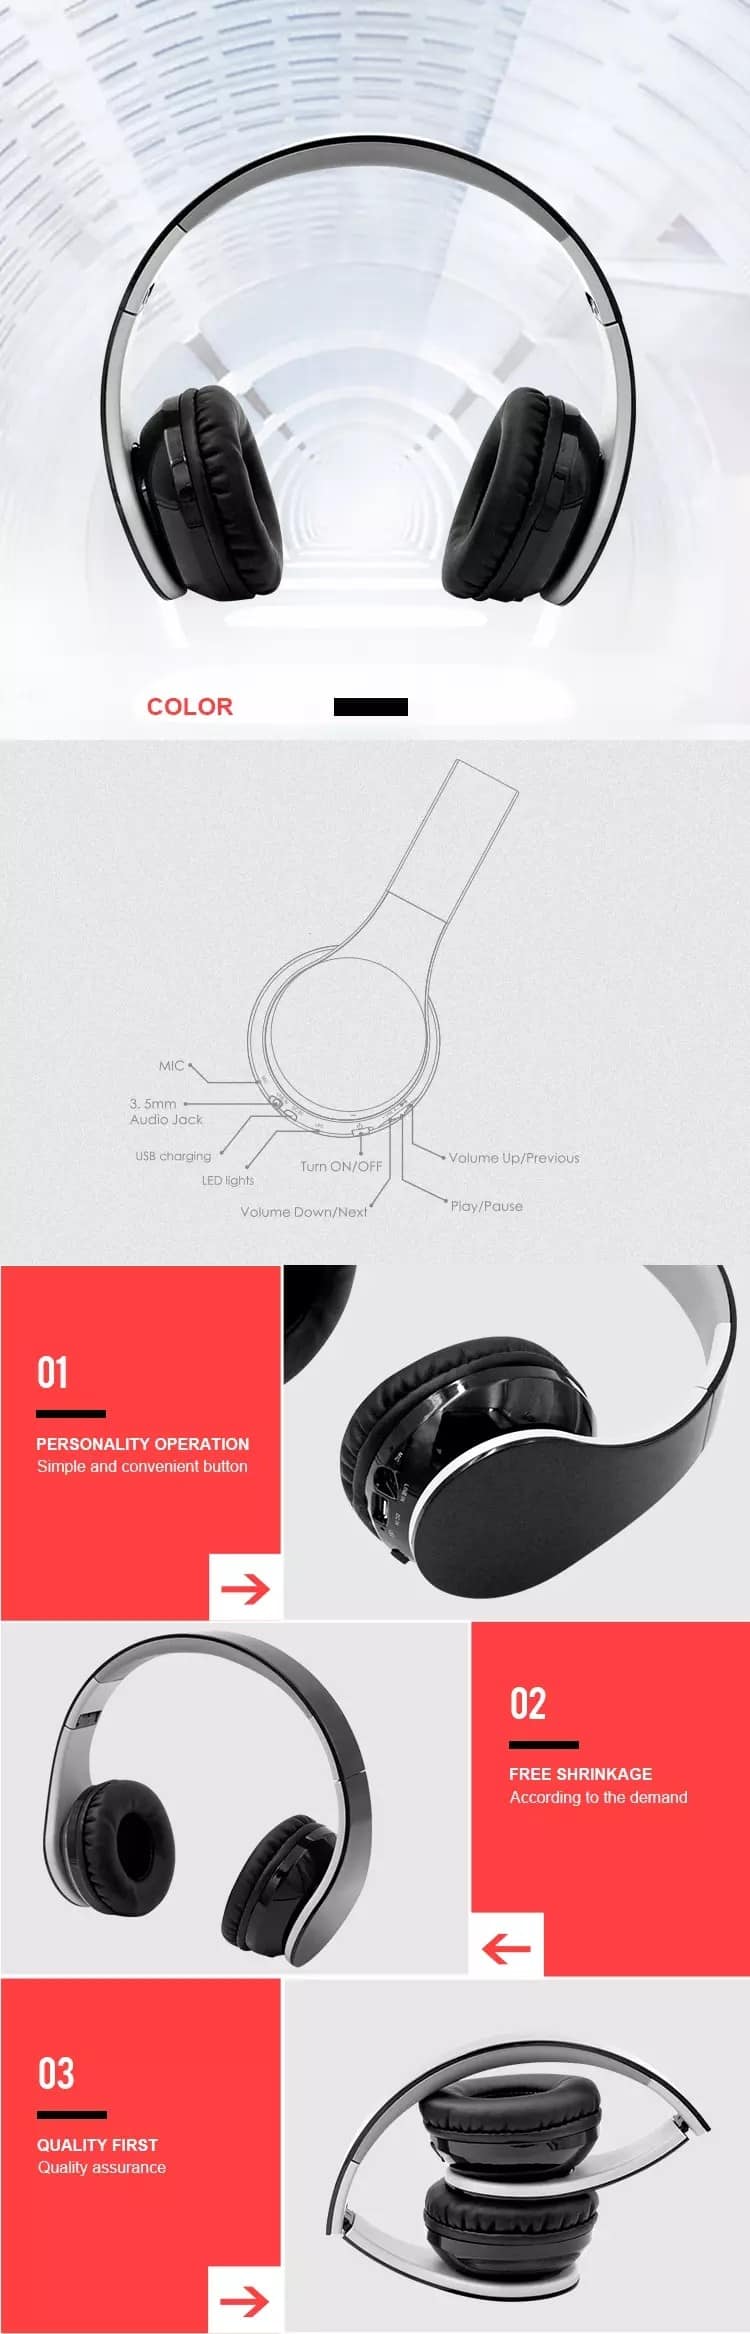 UNIJULIFE Wireless Bluetooth Headphones Foldable Headset With Microphone For Gaming Super Bass Stereo Noise Reduction